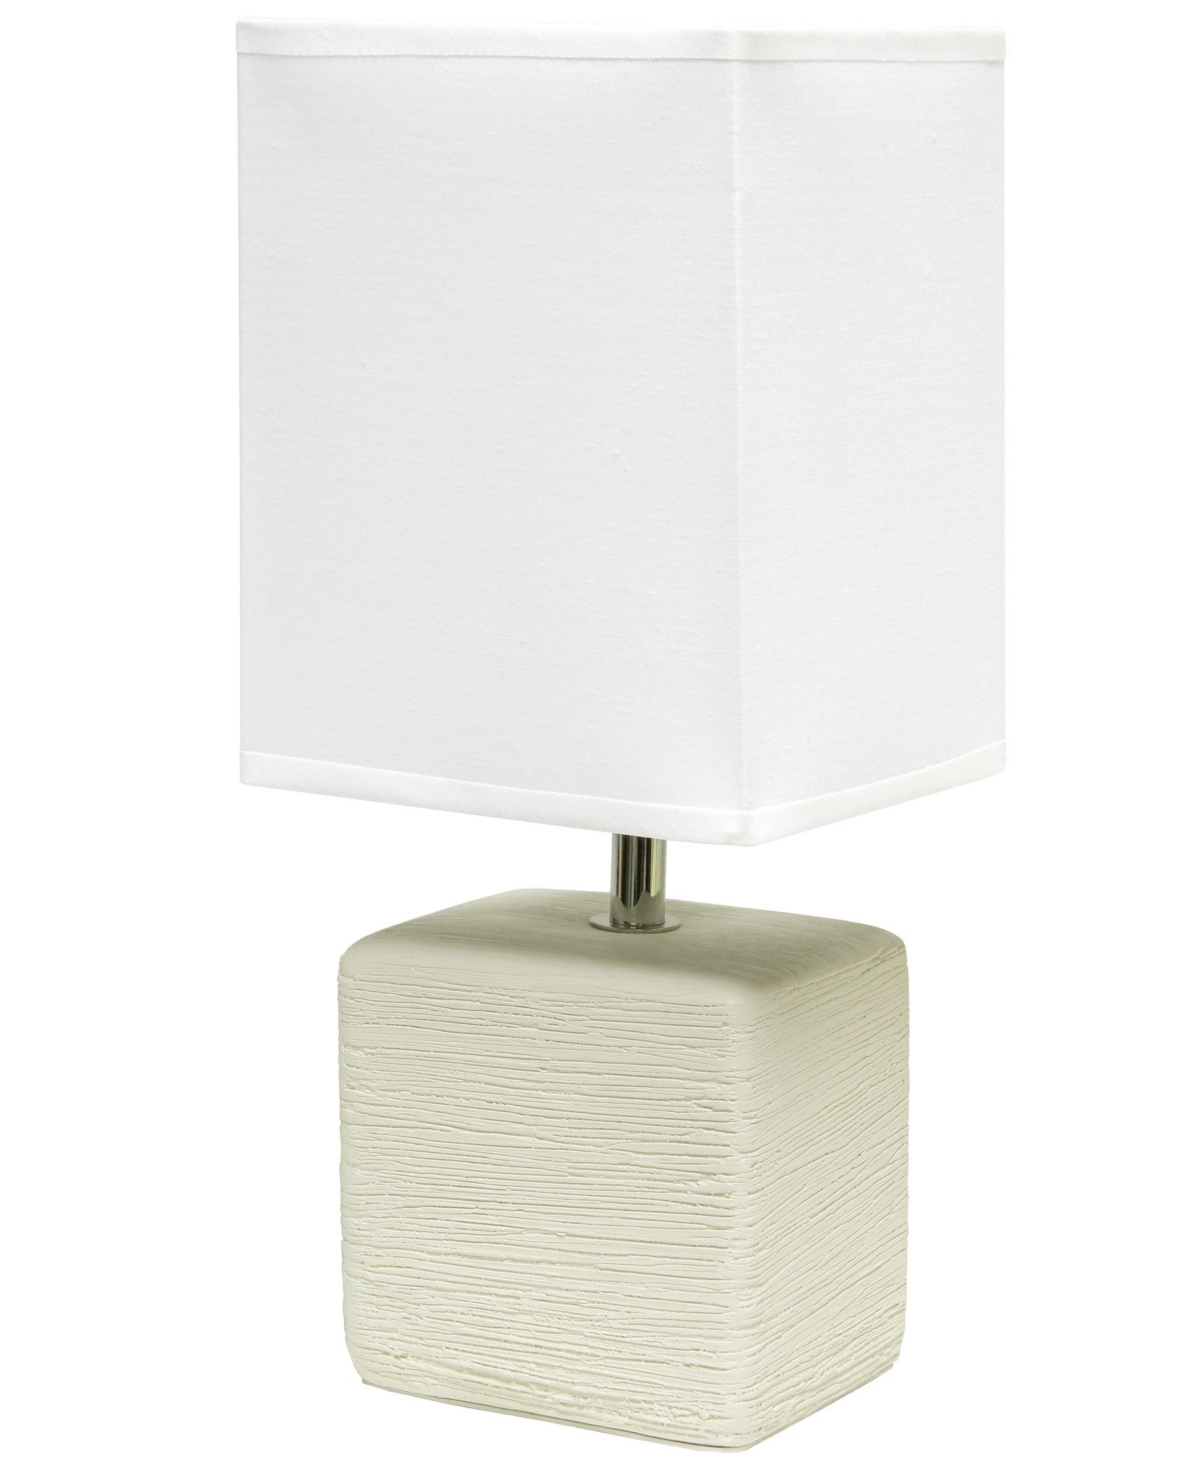 Simple Designs Petite Stone Table Lamp With Shade In Off White Base,white Shade